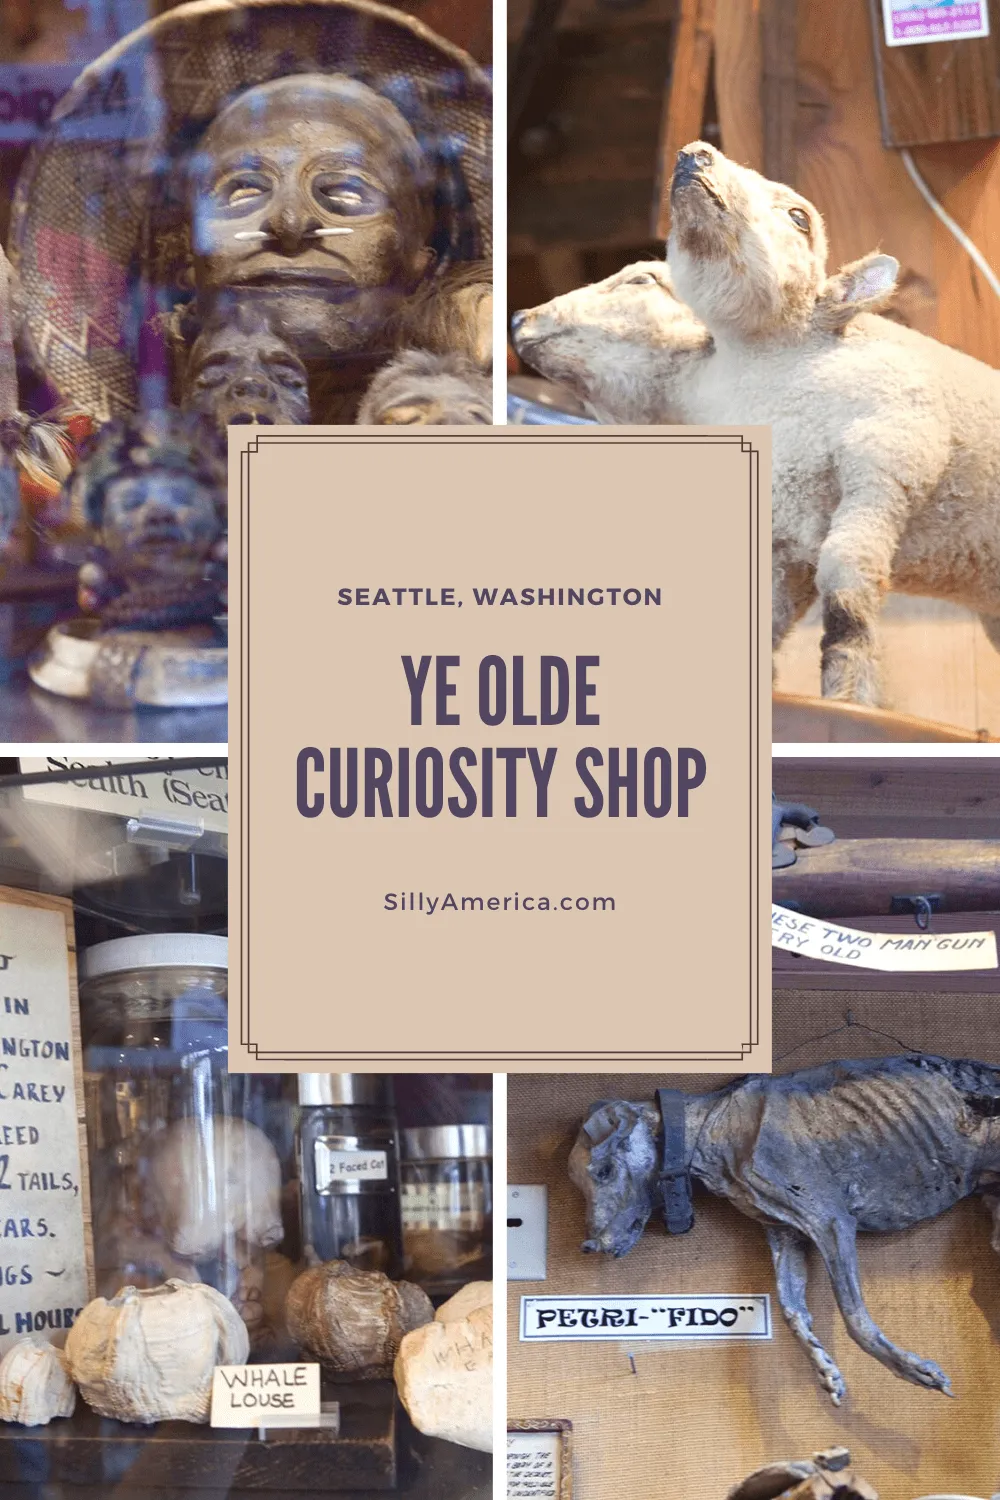 Ye Olde Curiosity Shop in Seattle, Washington is a must-see destination for lovers of the weird. The shop and oddity museum opened in 1899. #WashingtonRoadsideAttractions #WashingtonRoadsideAttraction #RoadsideAttractions #RoadsideAttraction #RoadTrip #WashingtonRoadTrip #WashingtonRoadTripMap #WashingtonRoadTripBucketLists #WashingtonBucketList #WashingtonWinterRoadTrip #SeattleRoadTrip #Seattle #SeattleWashington